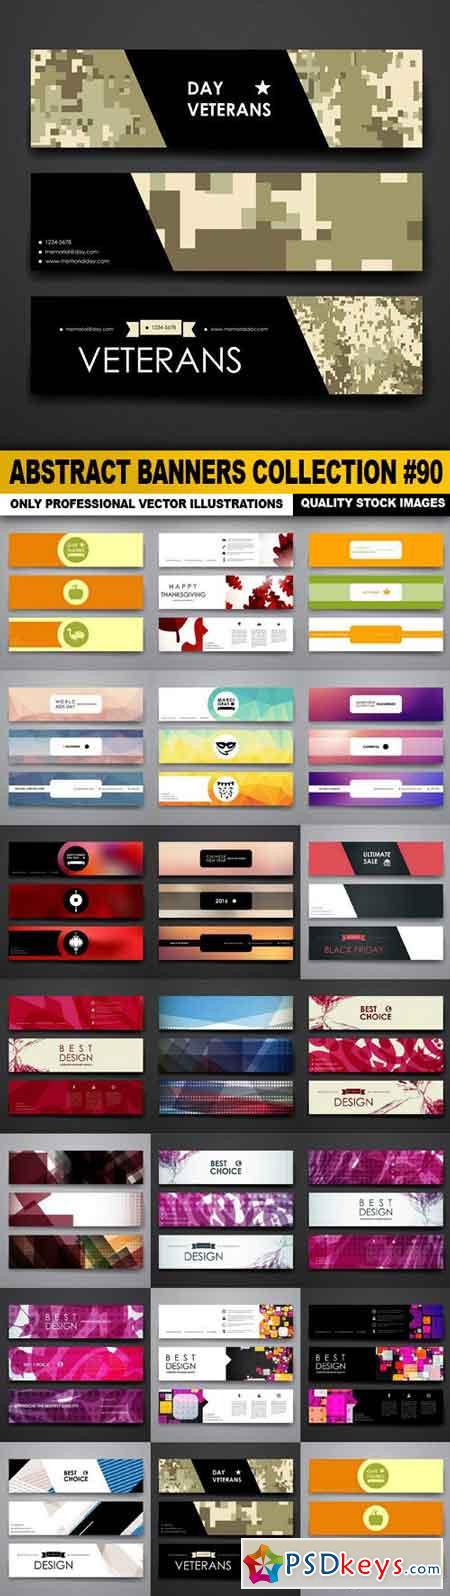 Abstract Banners Collection #90 - 20 Vectors